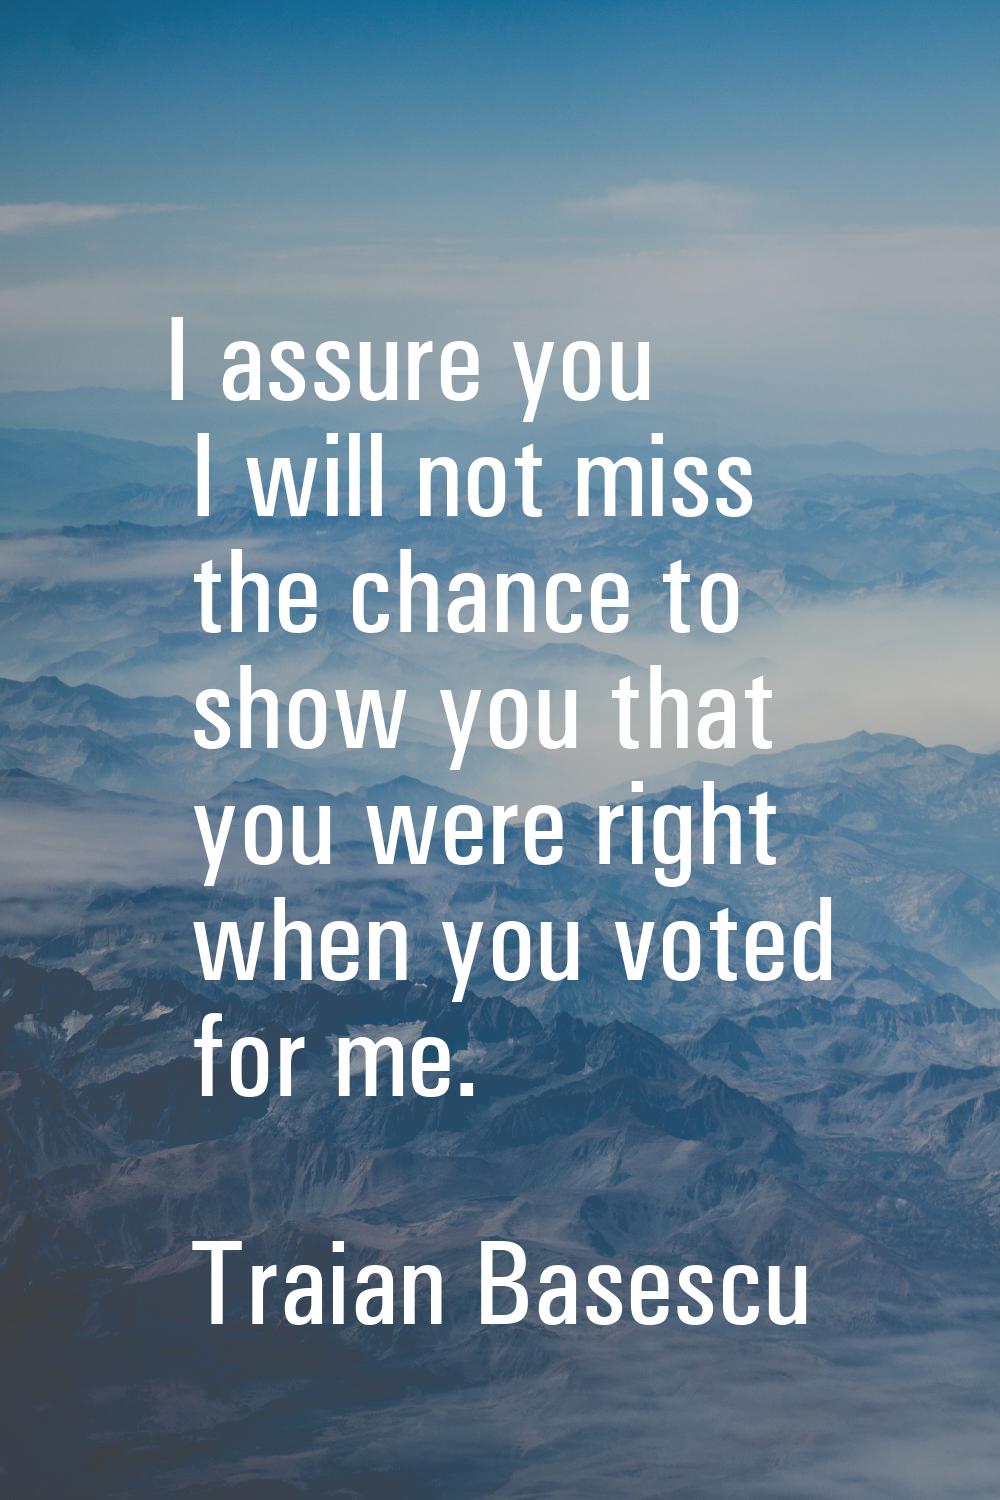 I assure you I will not miss the chance to show you that you were right when you voted for me.